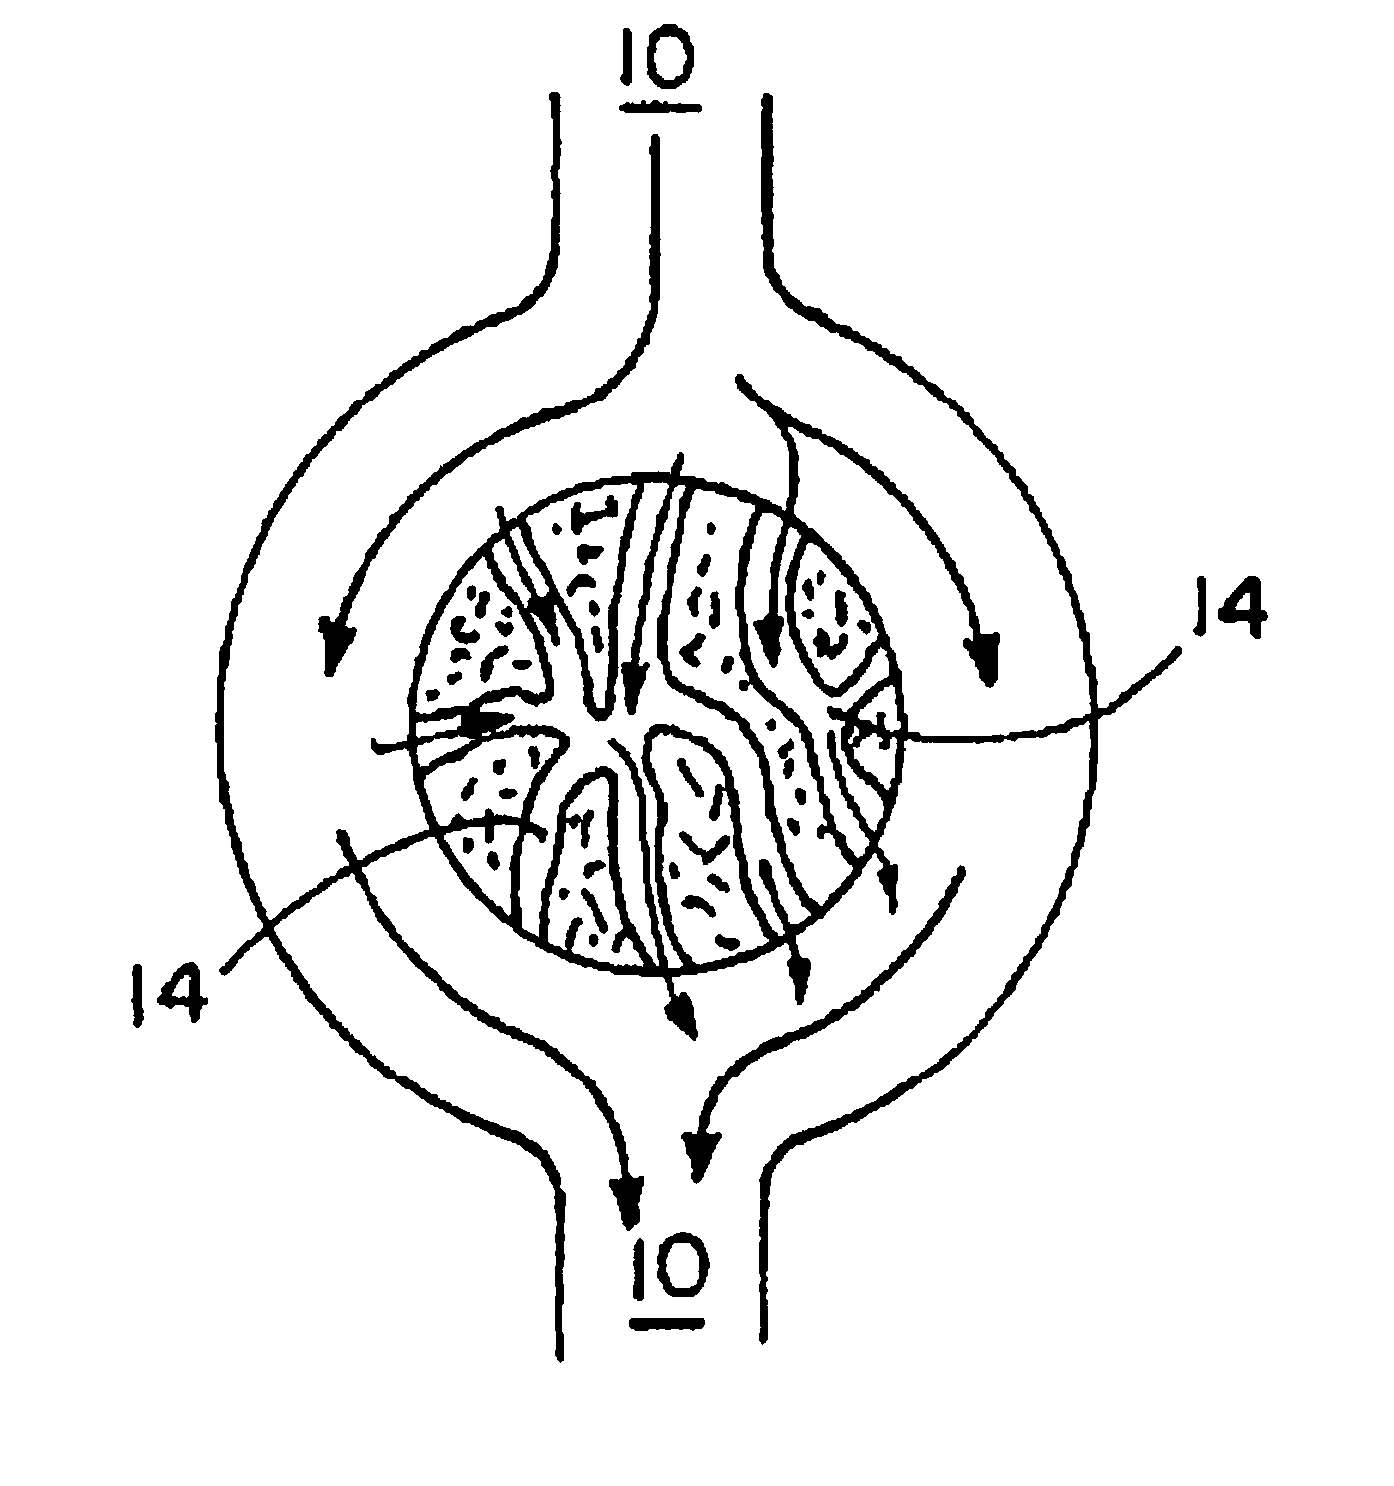 Patent image from Perseptive Biosystems v Pharmacia